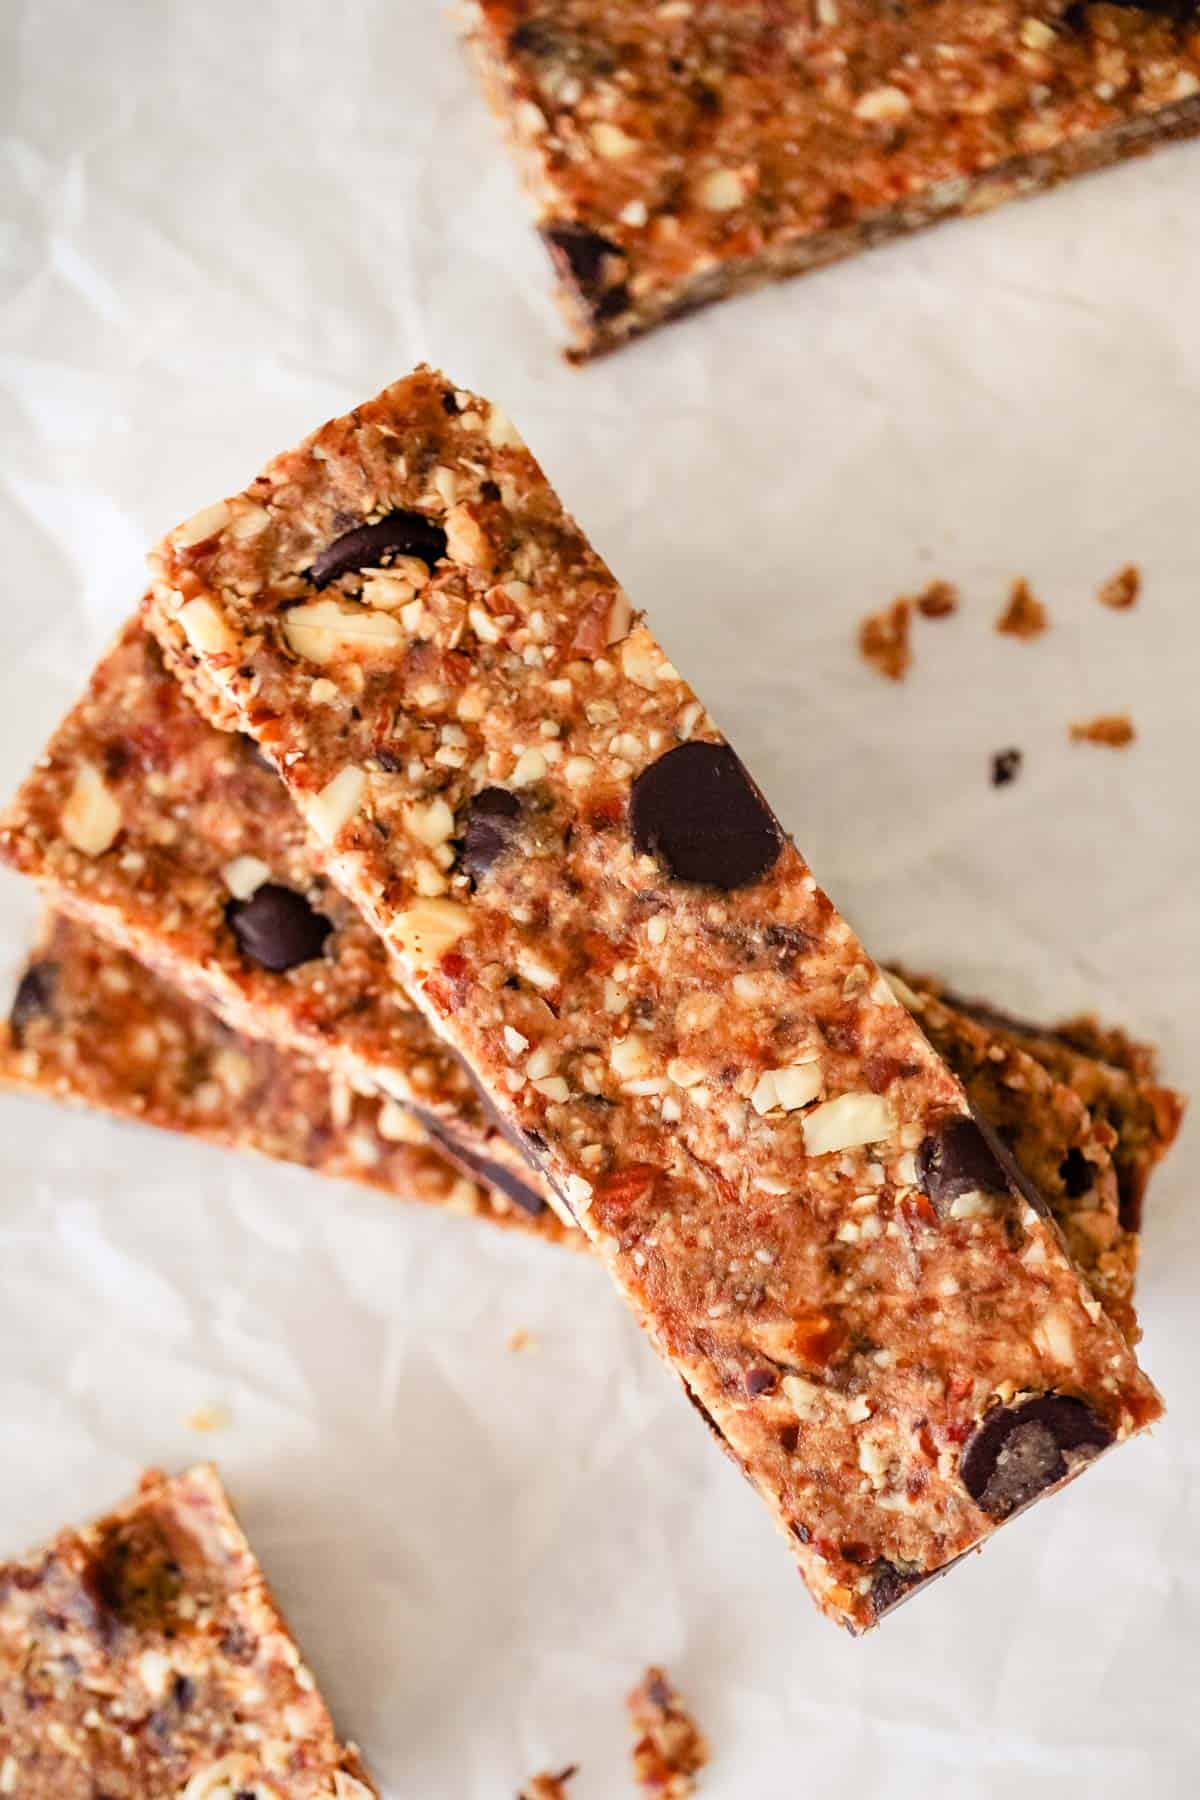 Stack of homemade energy bars on parchment paper.